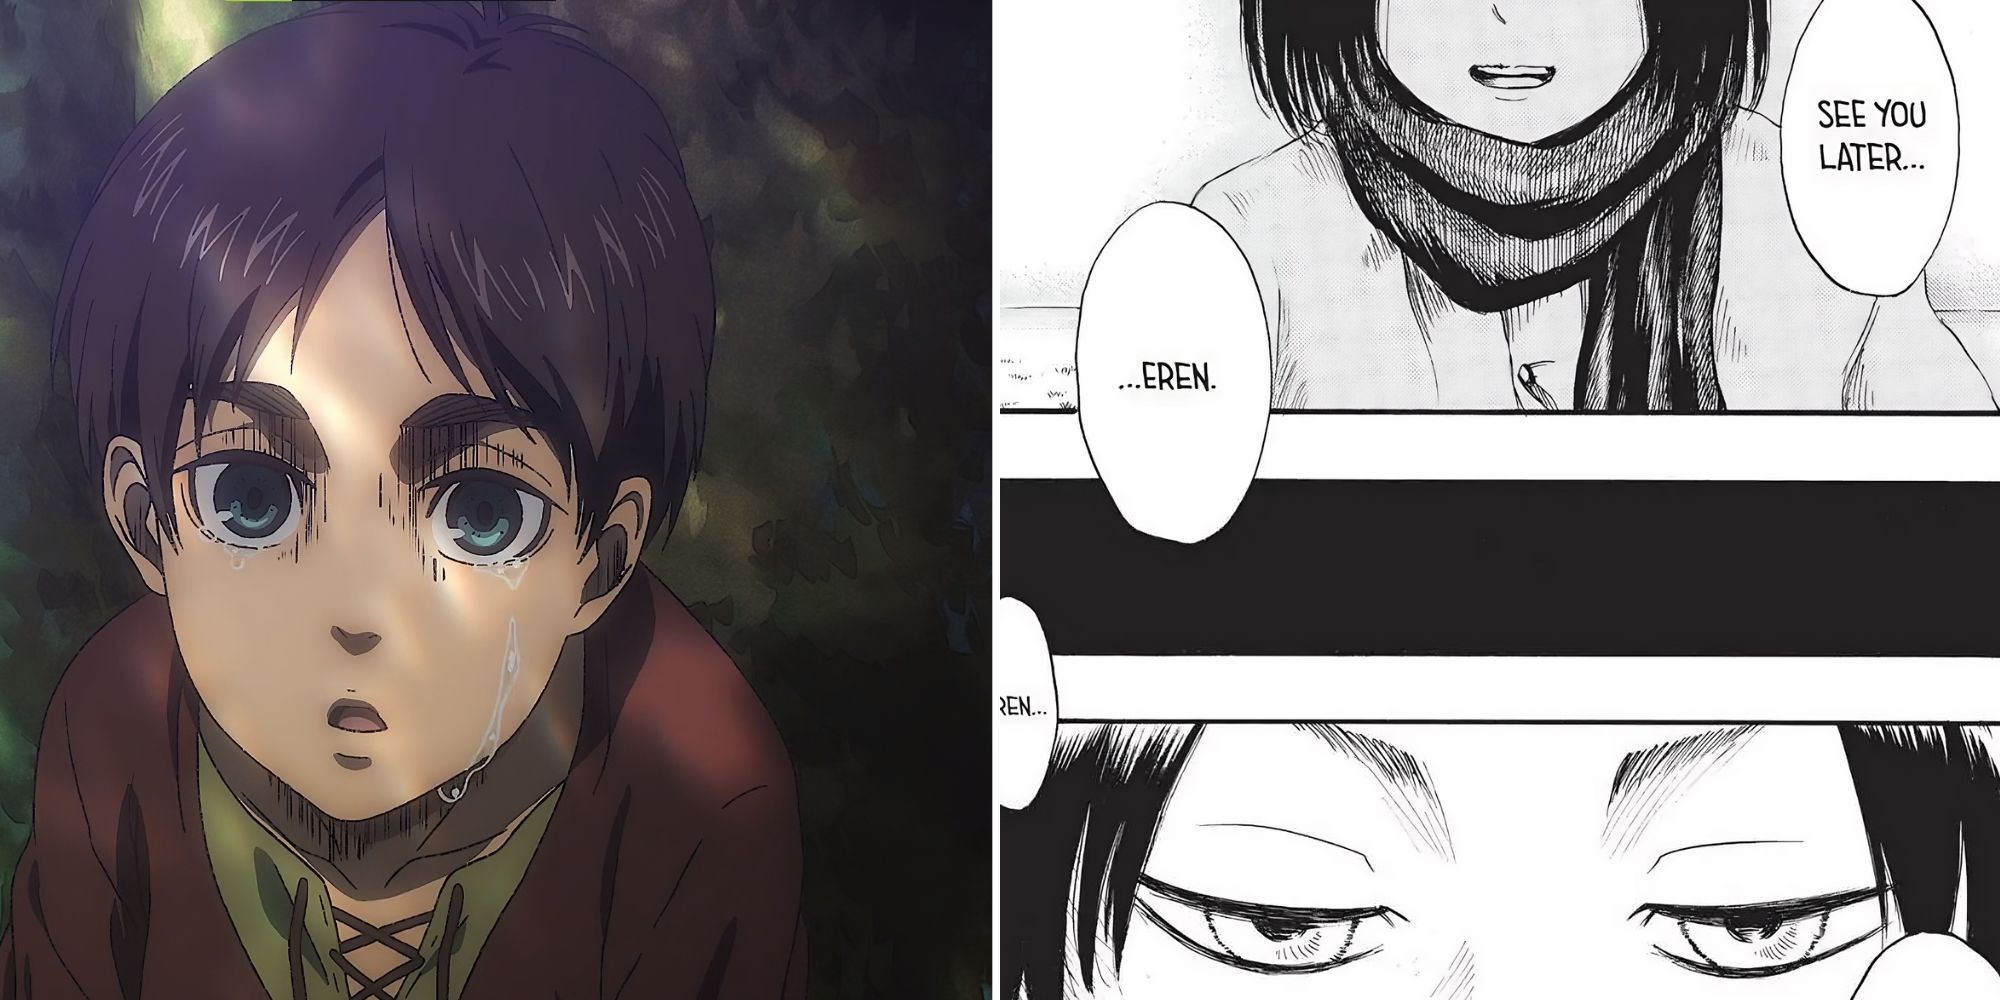 Mikasa says see you later to Eren 